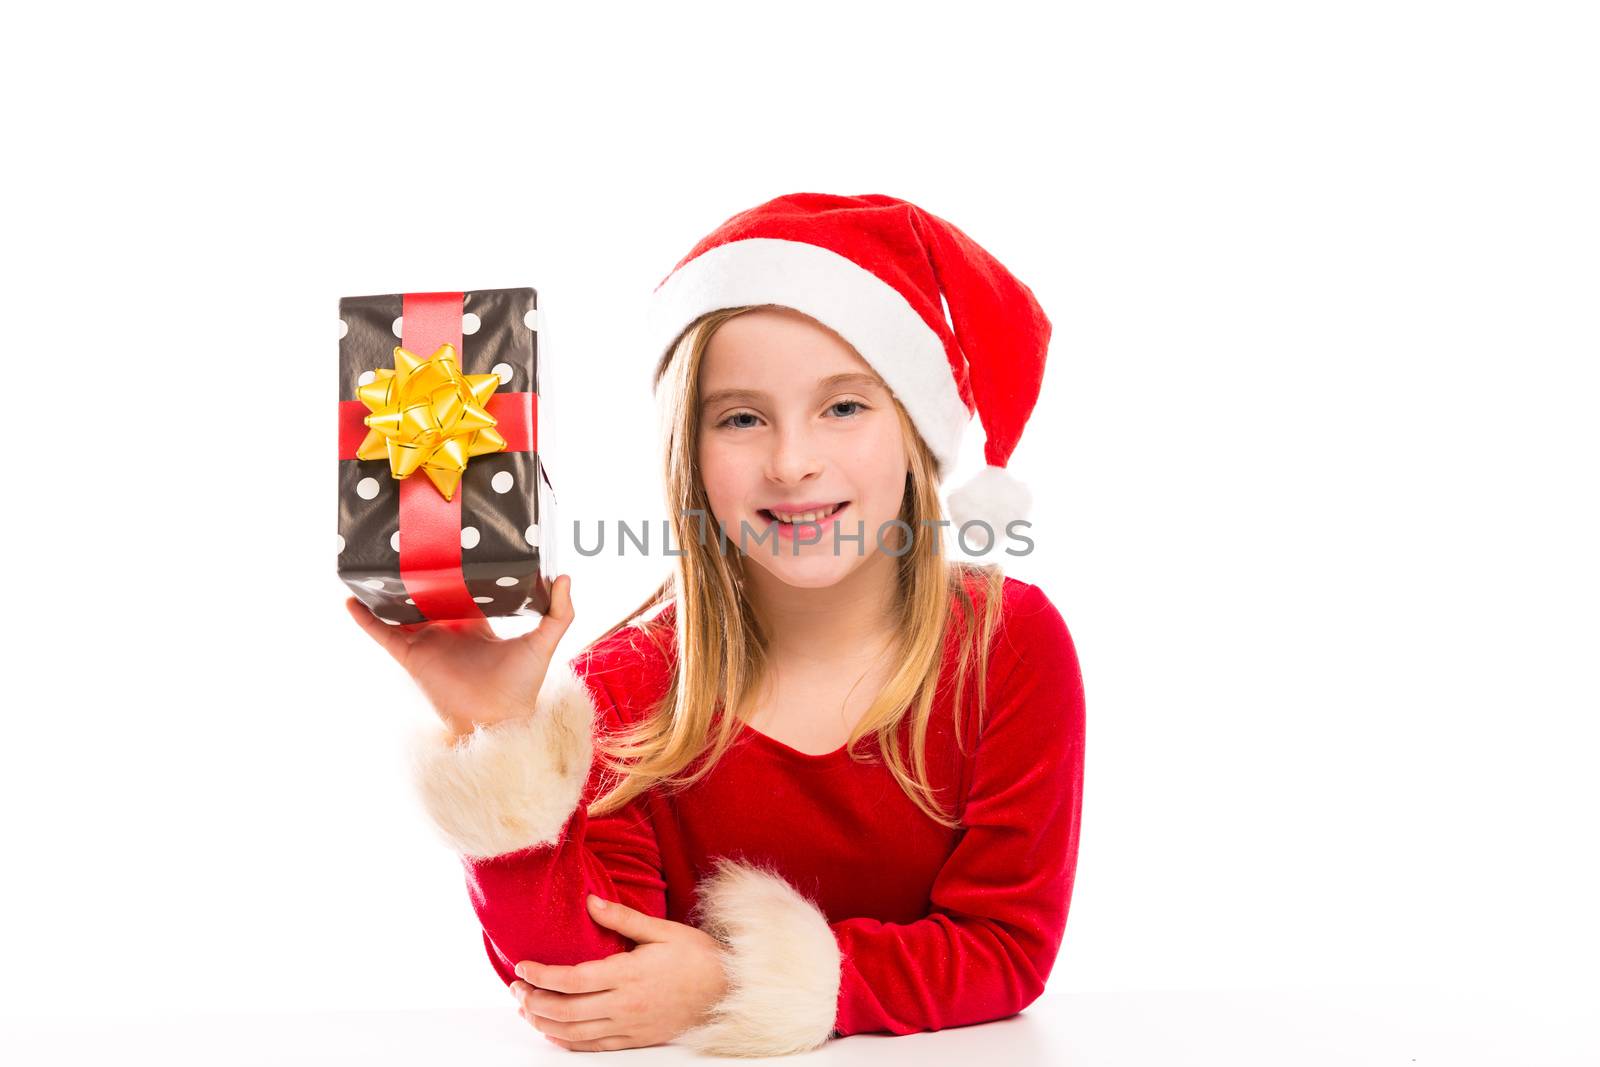 Christmas Santa blond kid girl happy excited with ribbon gift isolated on white background